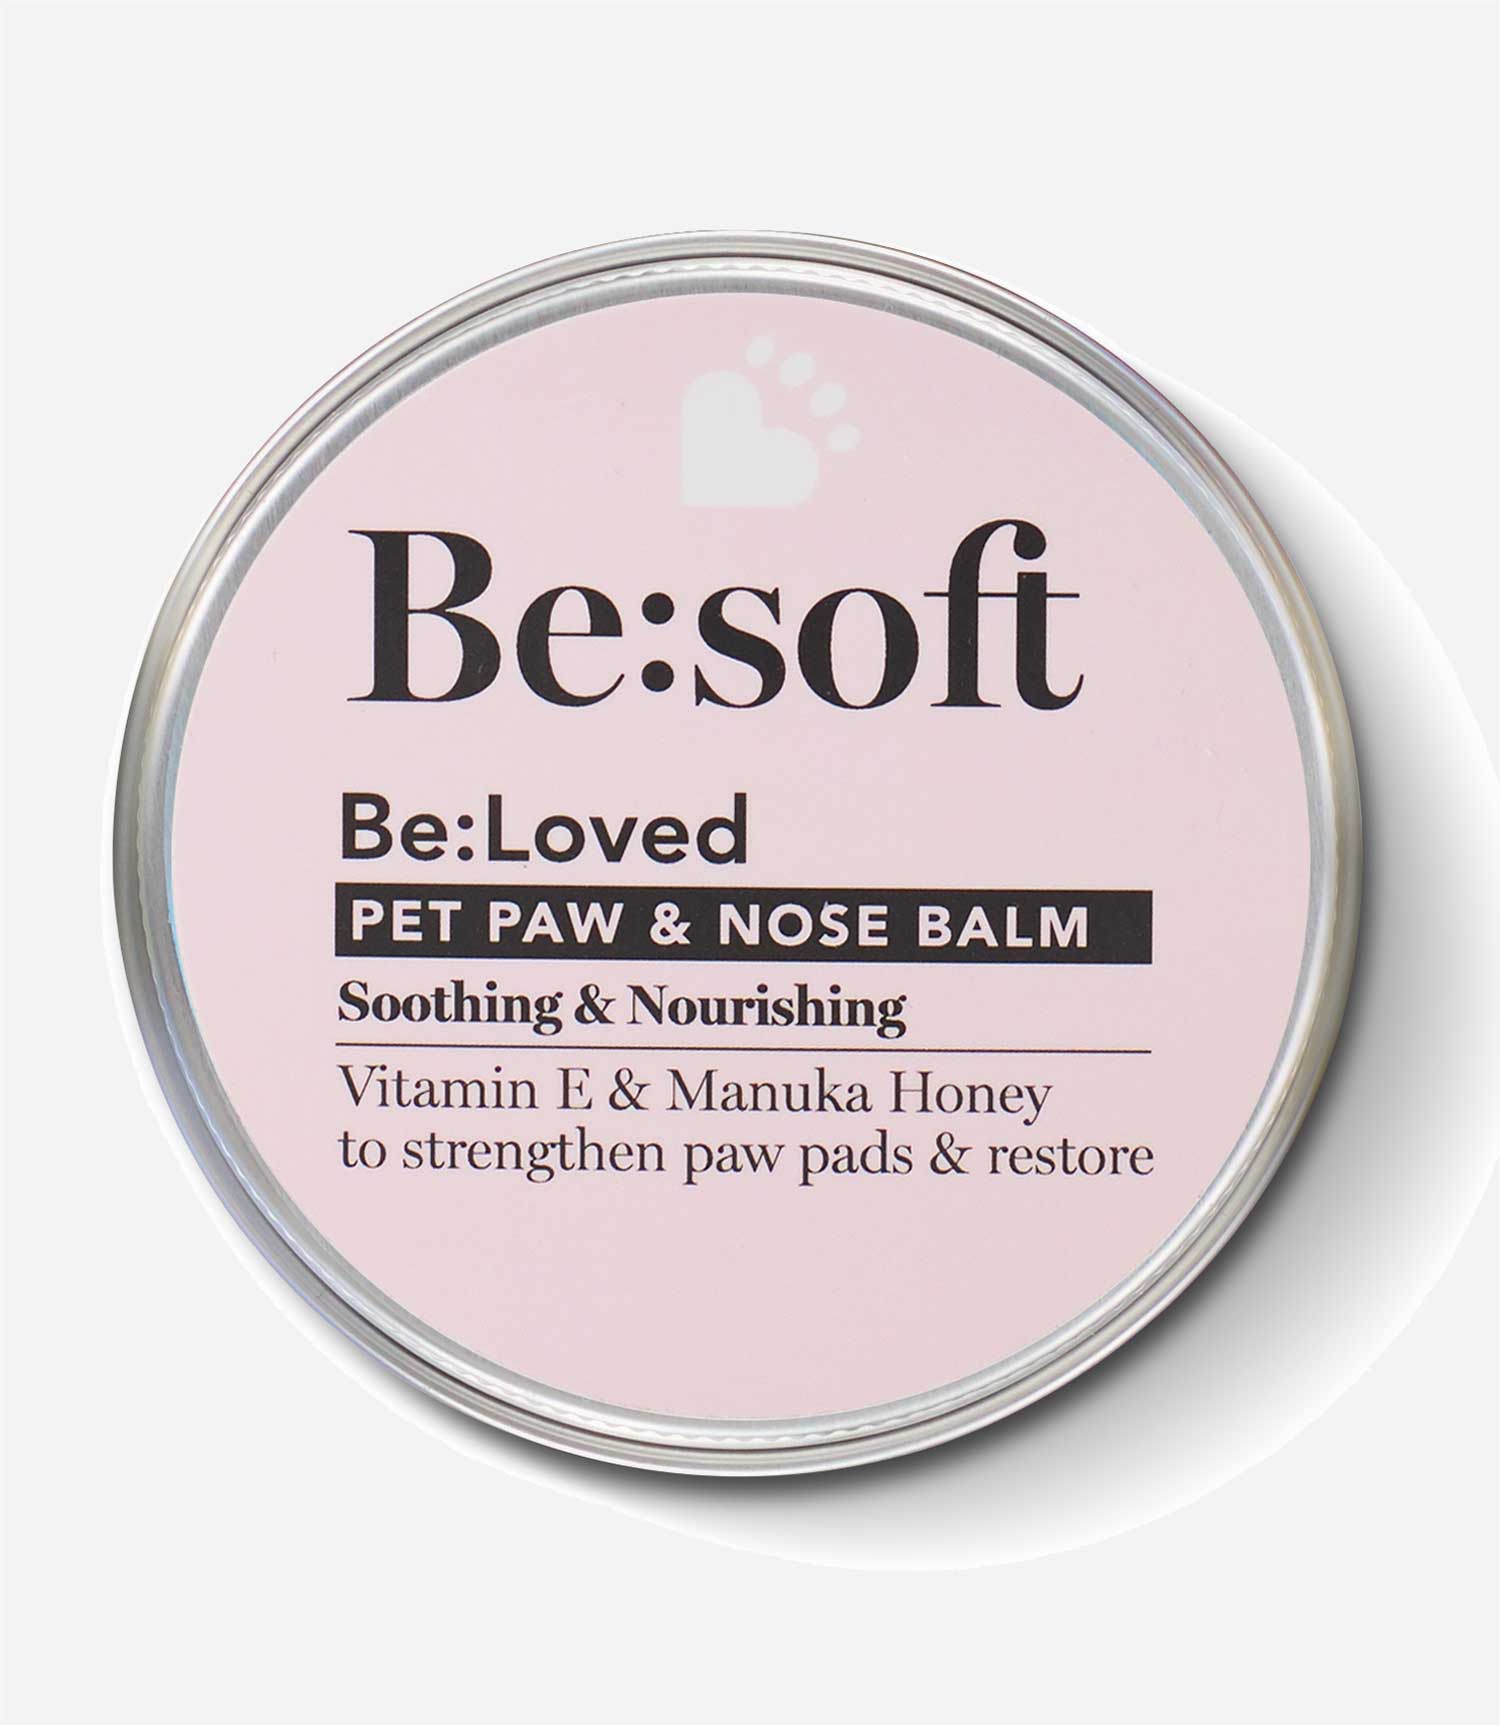 Be:Loved - Be:Soft - Paw & Nose Balm - 60g - Nest Pets